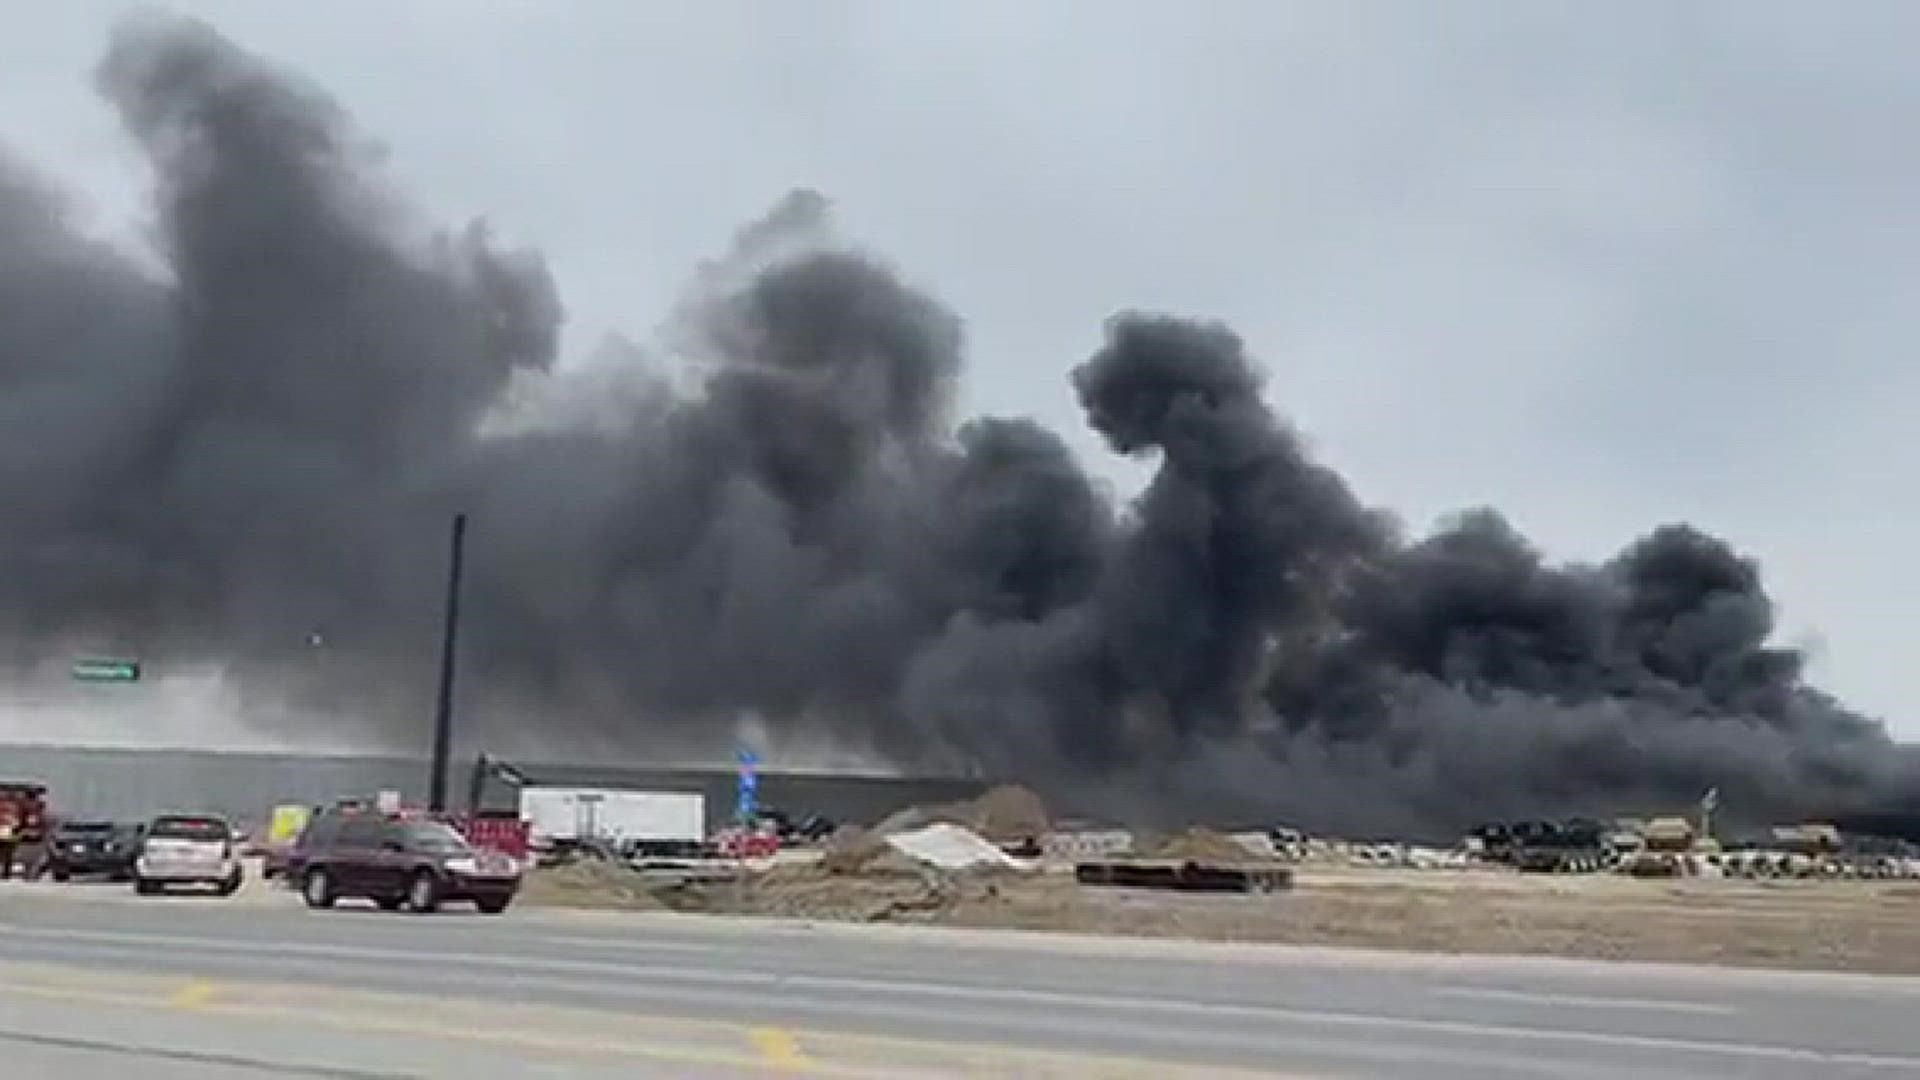 A warehouse that's under construction caught fire in Brownsburg Friday, March 18, 2022.
Credit: Hadley Fruits